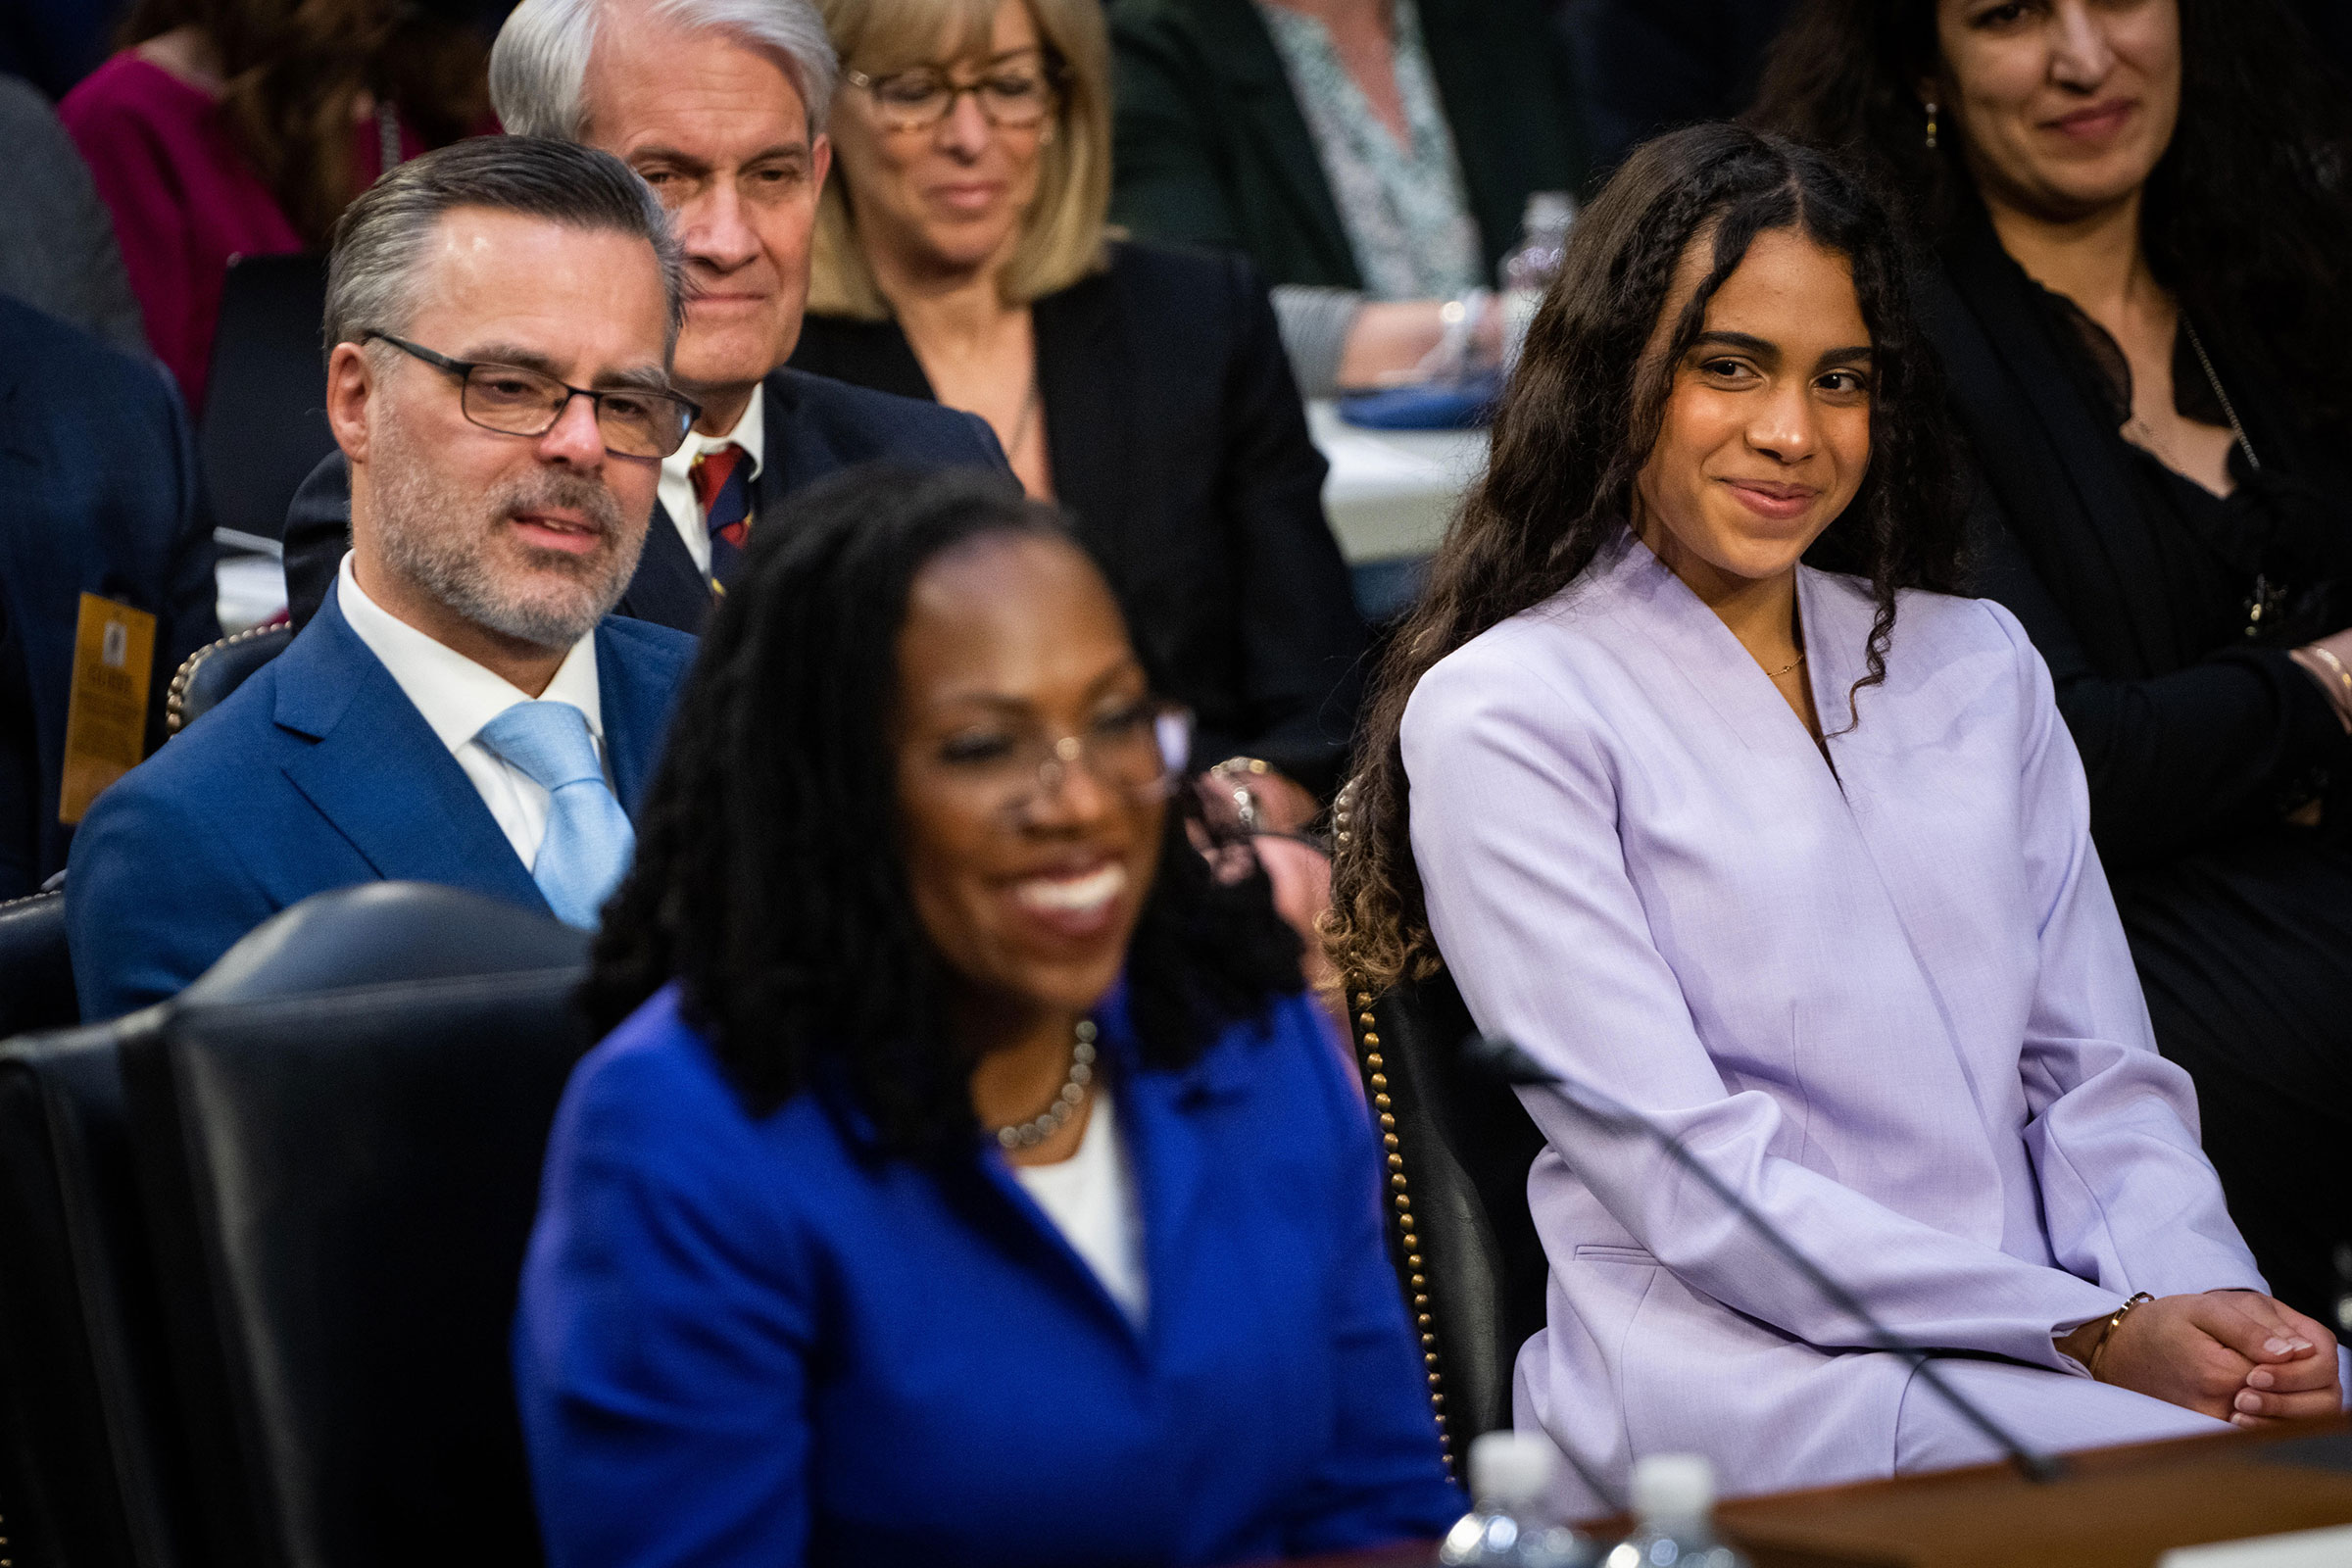 This photo of Leila Jackson looking at her mother with pride on Mar. 21 has come to represent many things since it went viral online, including what Jackson's historic nomination means for young women of color. When Leila was 11 years old, she wrote a letter to President Barack Obama asking him to nominate her mother to the Supreme Court. (Sarahbeth Maney—The New York Times/Redux)